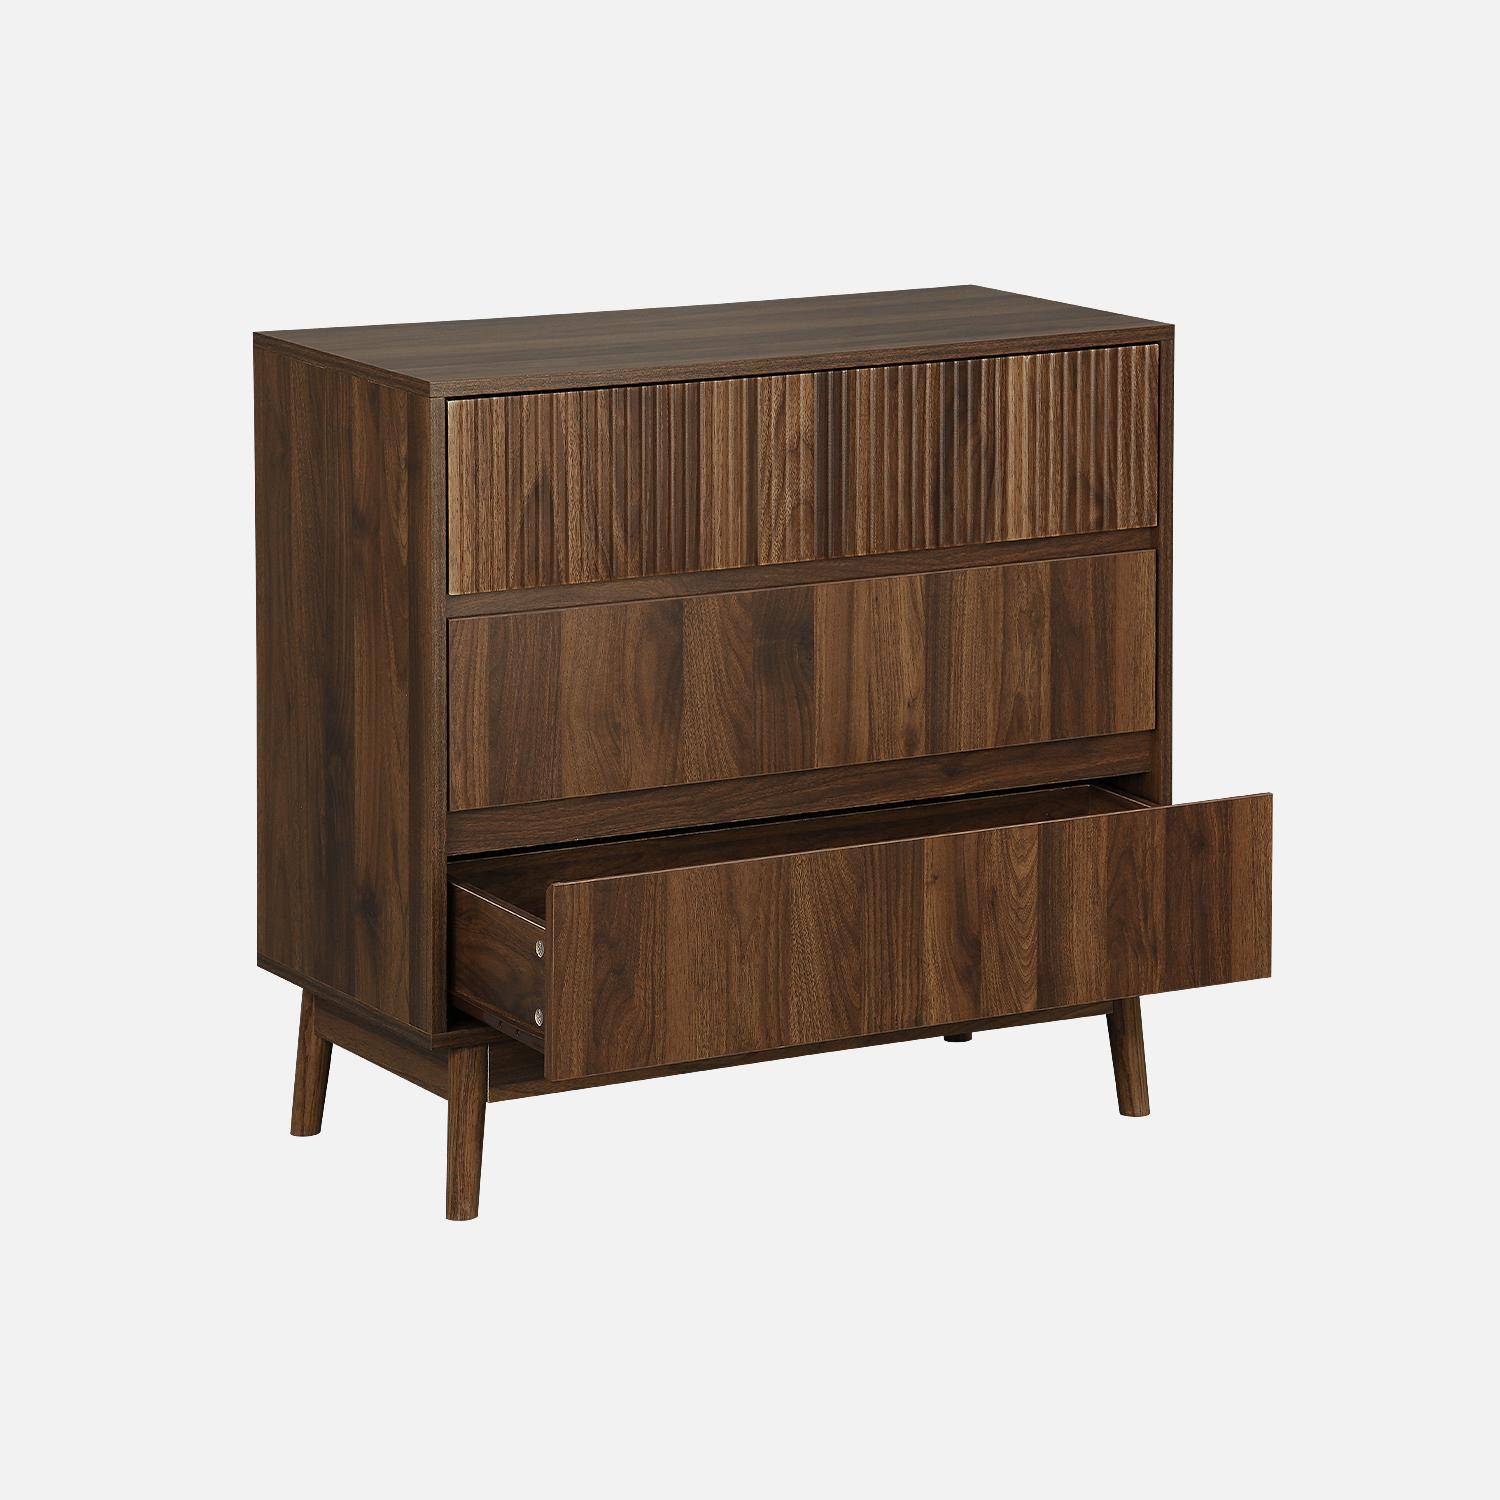 Grooved wood detail 3-drawer chest, 80x40x80cm - Linear - Dark Wood colour Photo5